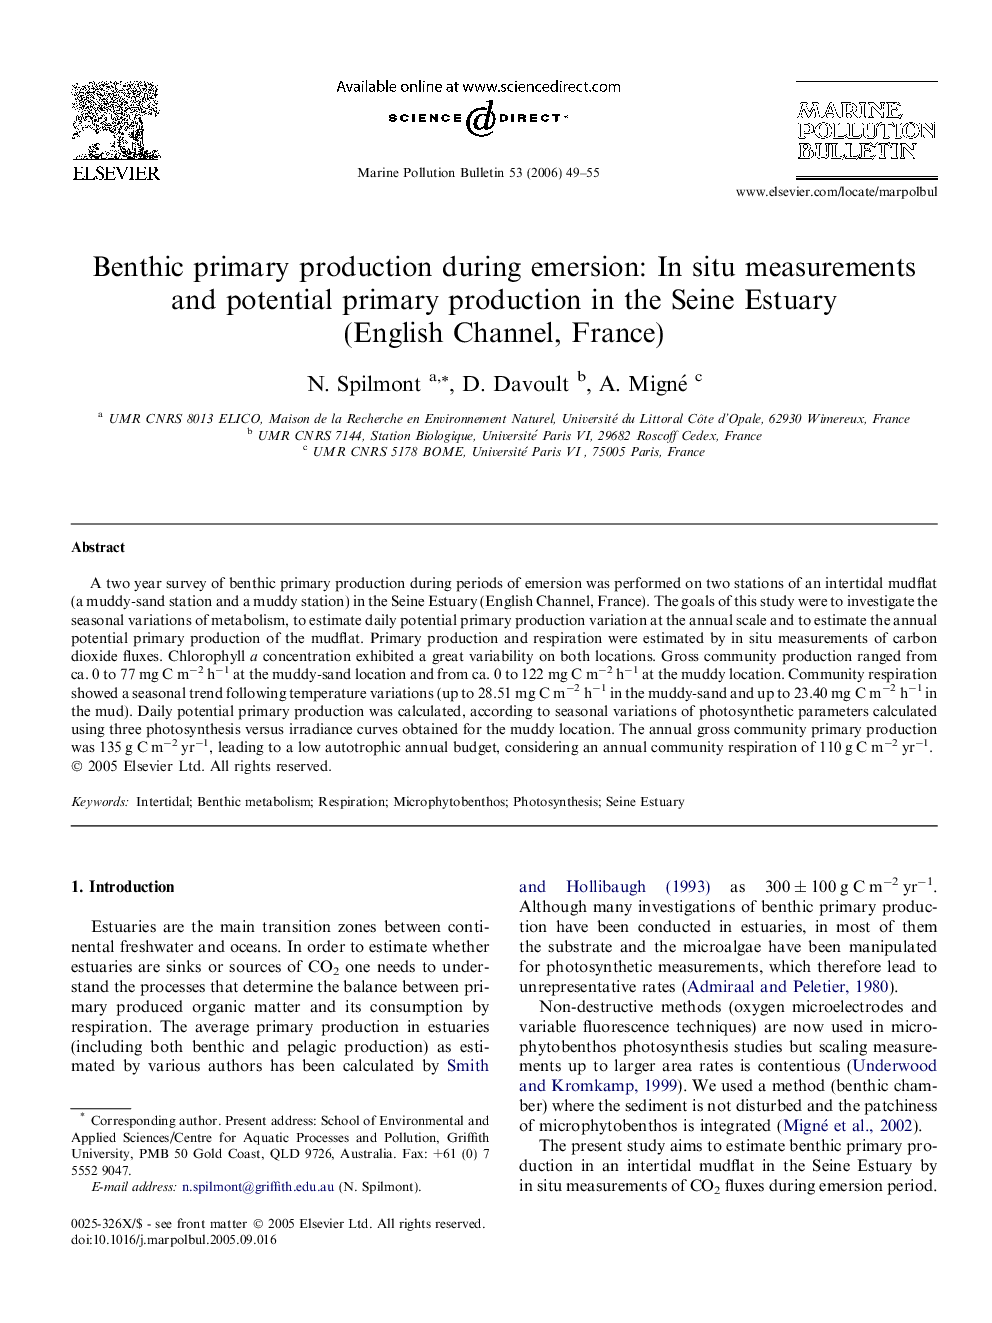 Benthic primary production during emersion: In situ measurements and potential primary production in the Seine Estuary (English Channel, France)